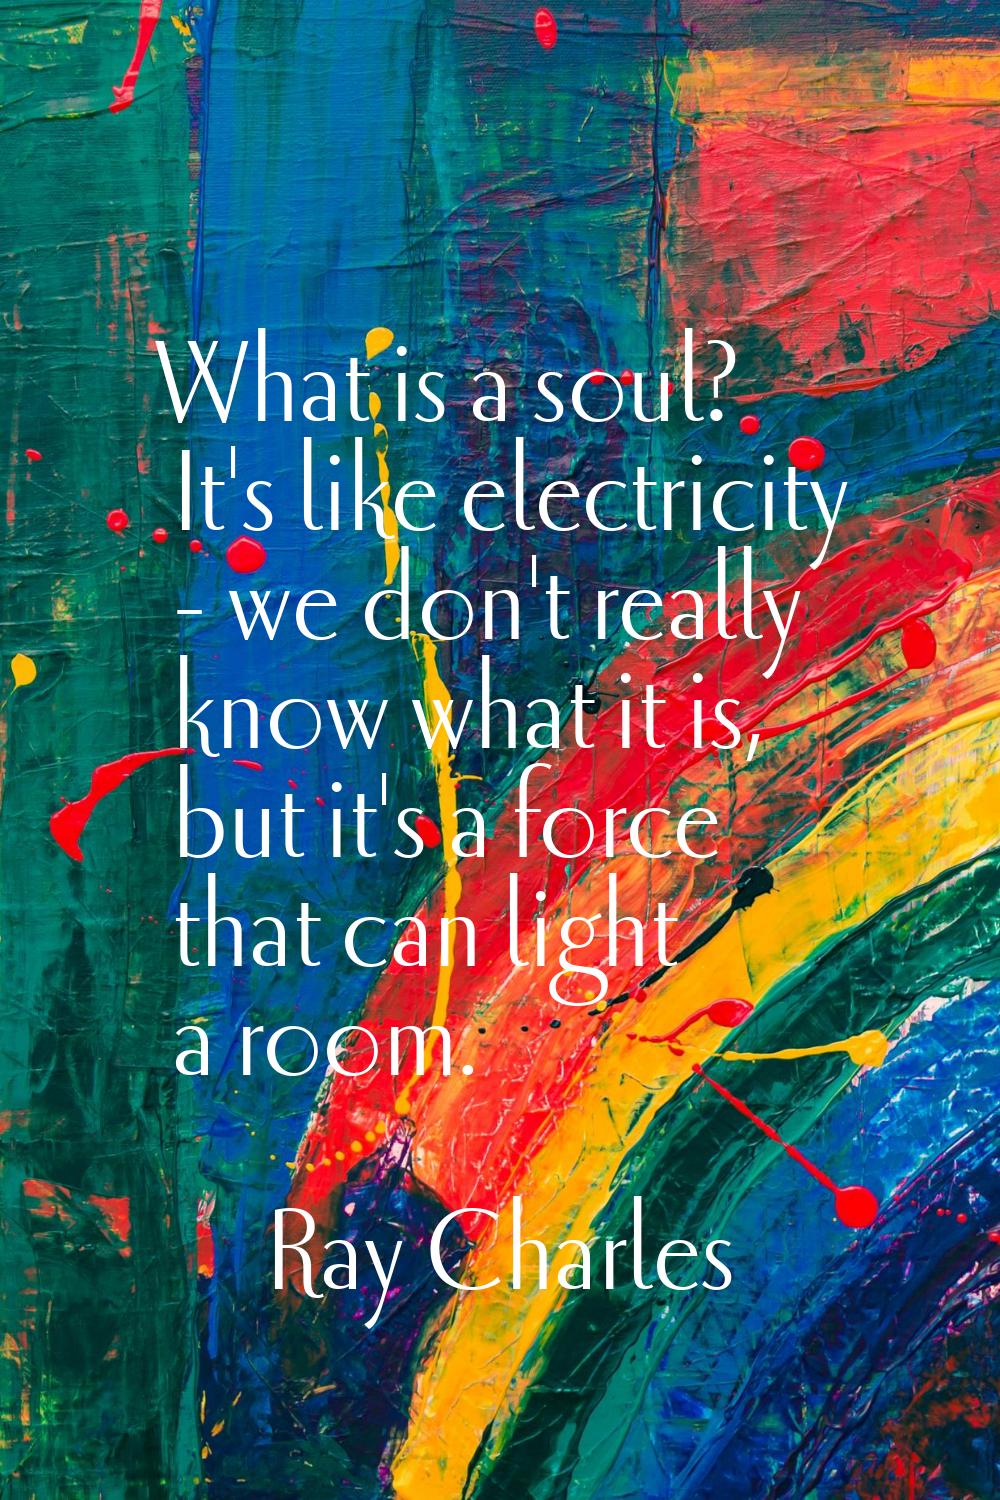 What is a soul? It's like electricity - we don't really know what it is, but it's a force that can 